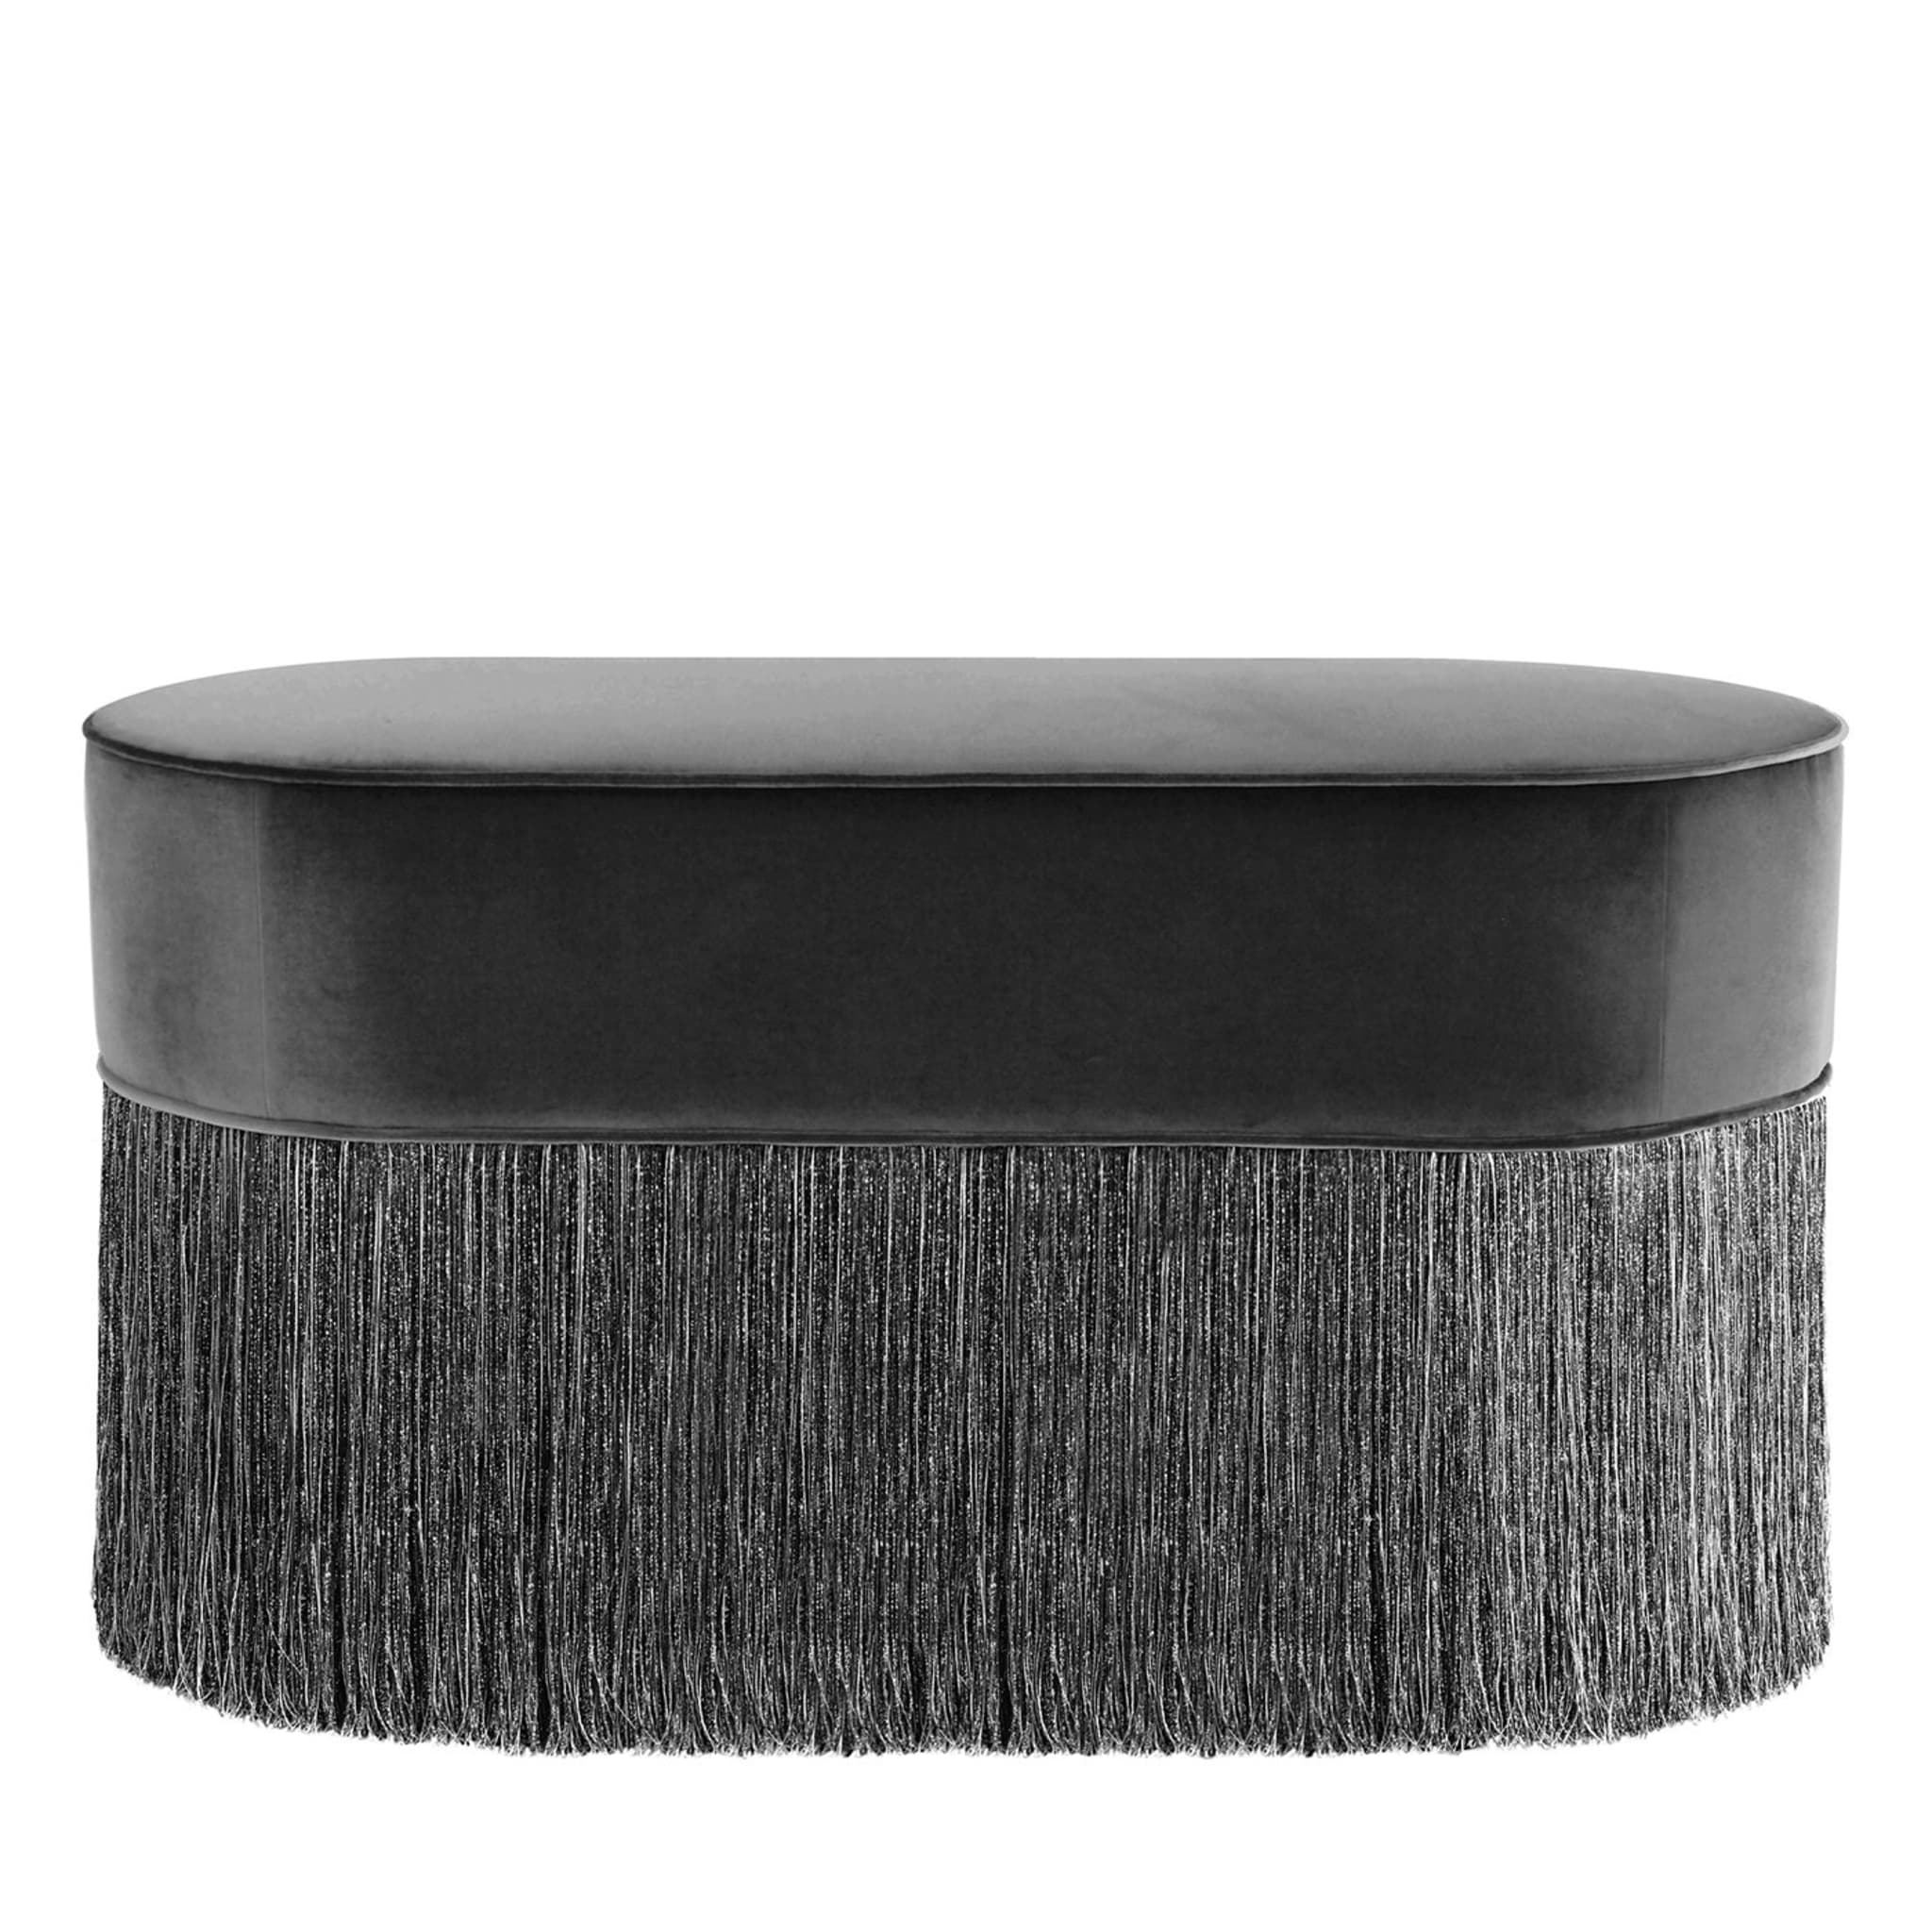 Sparkle Black Oval Ottoman with Black and Silver Fringe - Main view